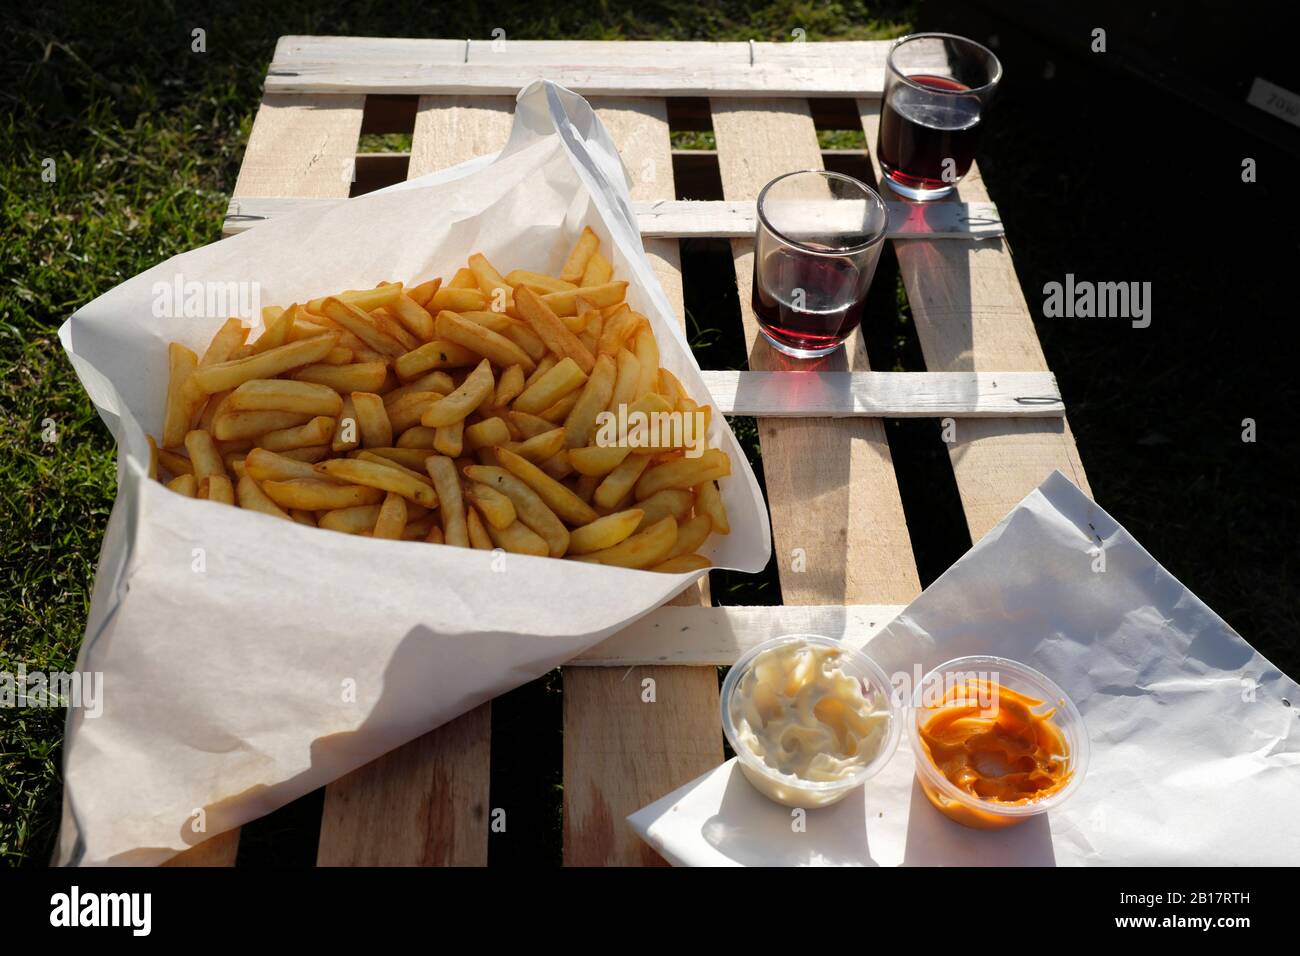 France, Brittany, Audierne, French fries with mayonnaise, ketchup and red wine - picnic on wooden crate Stock Photo